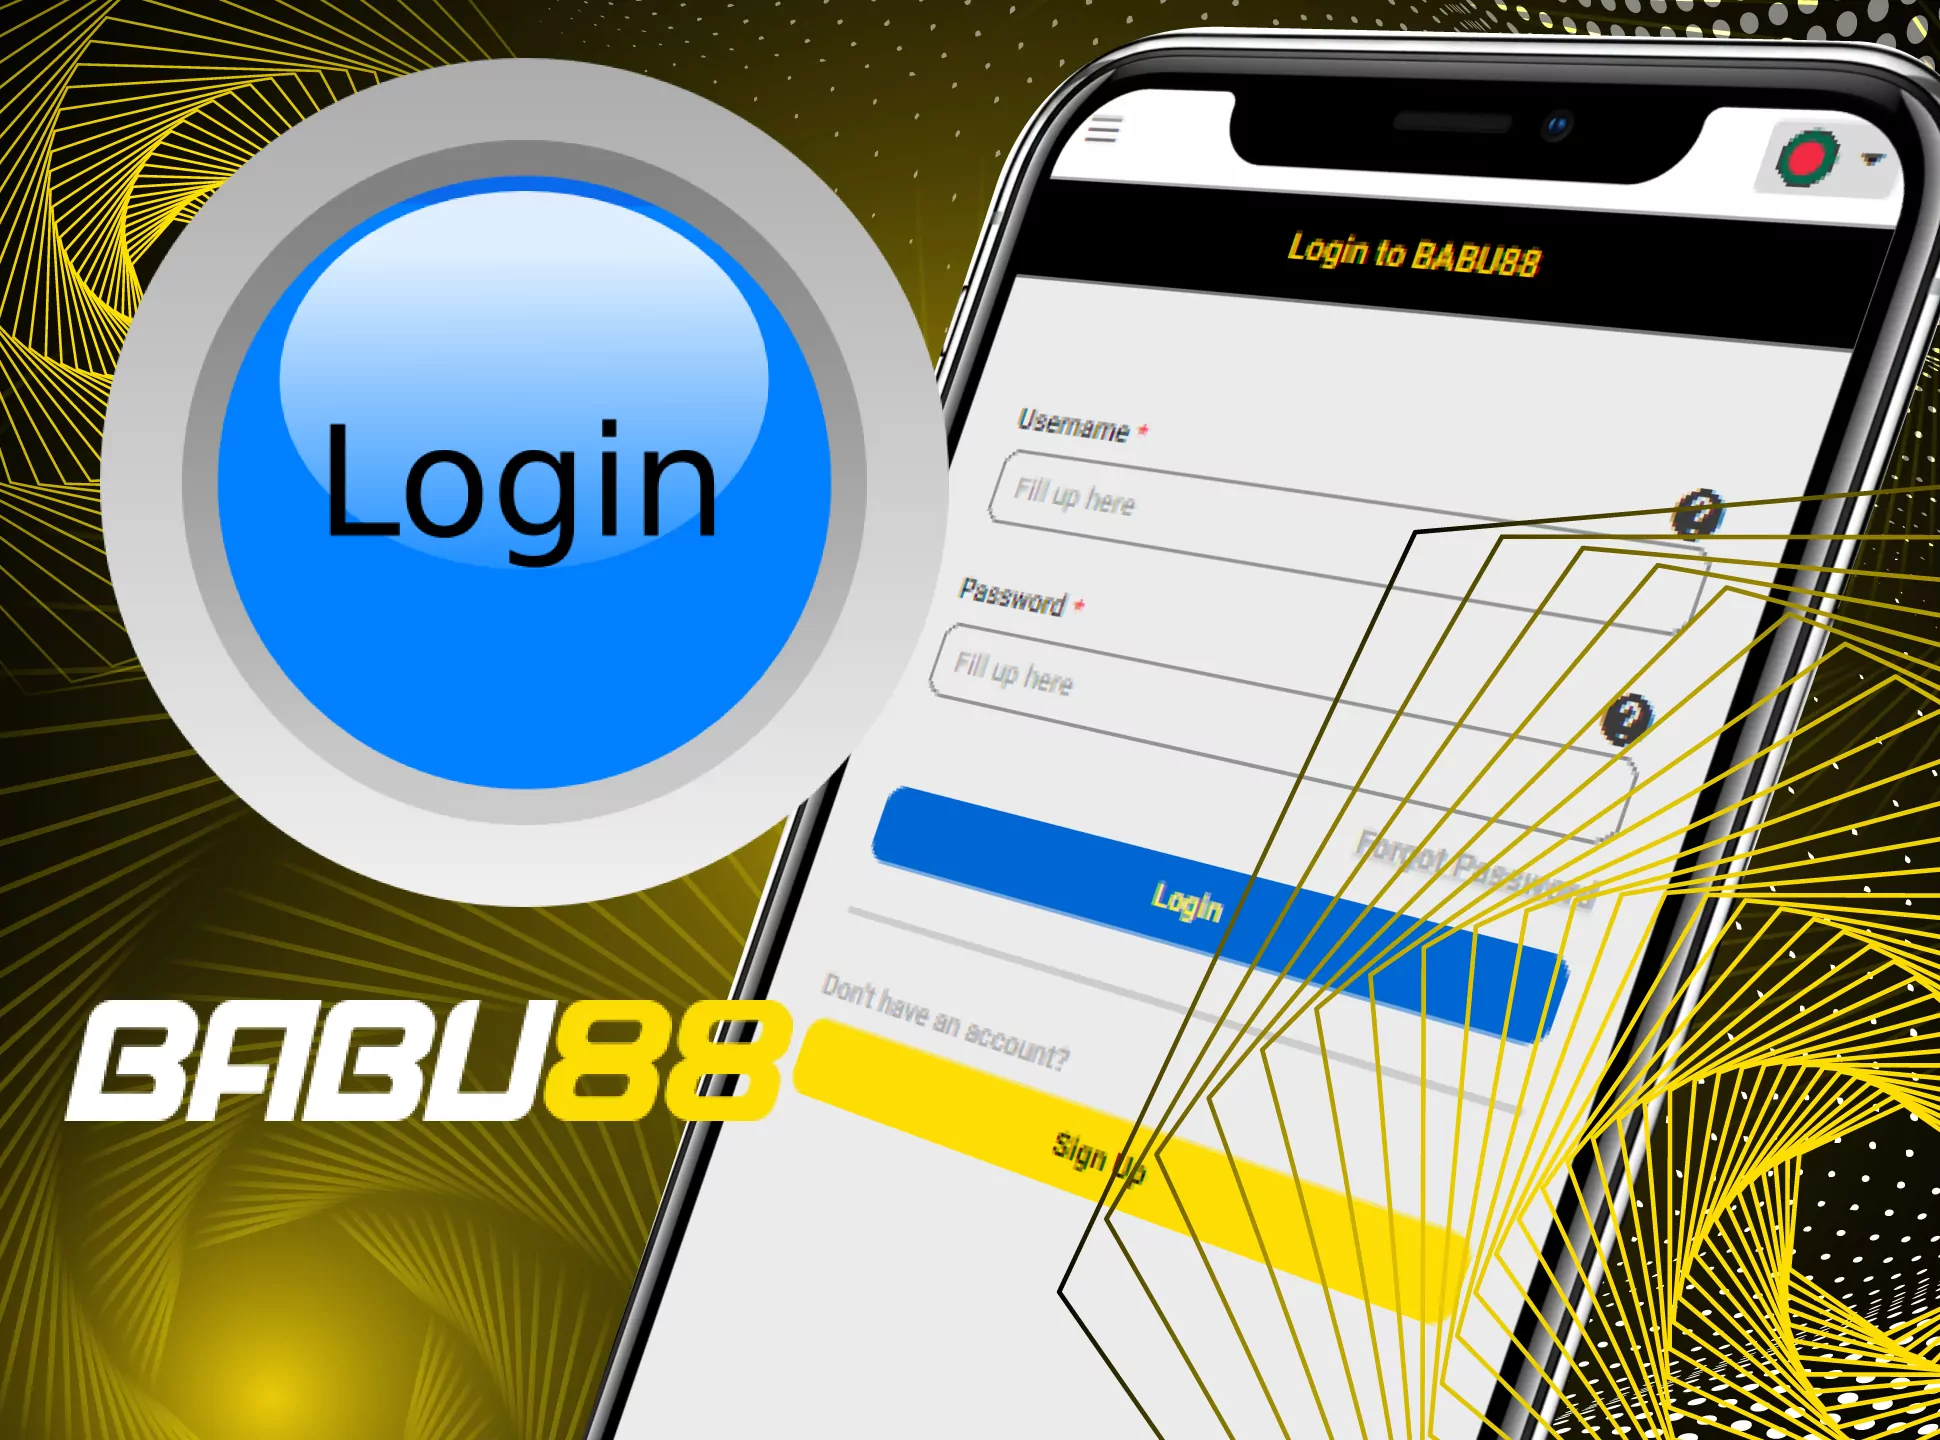 Use your username and password to log in to Babu88.